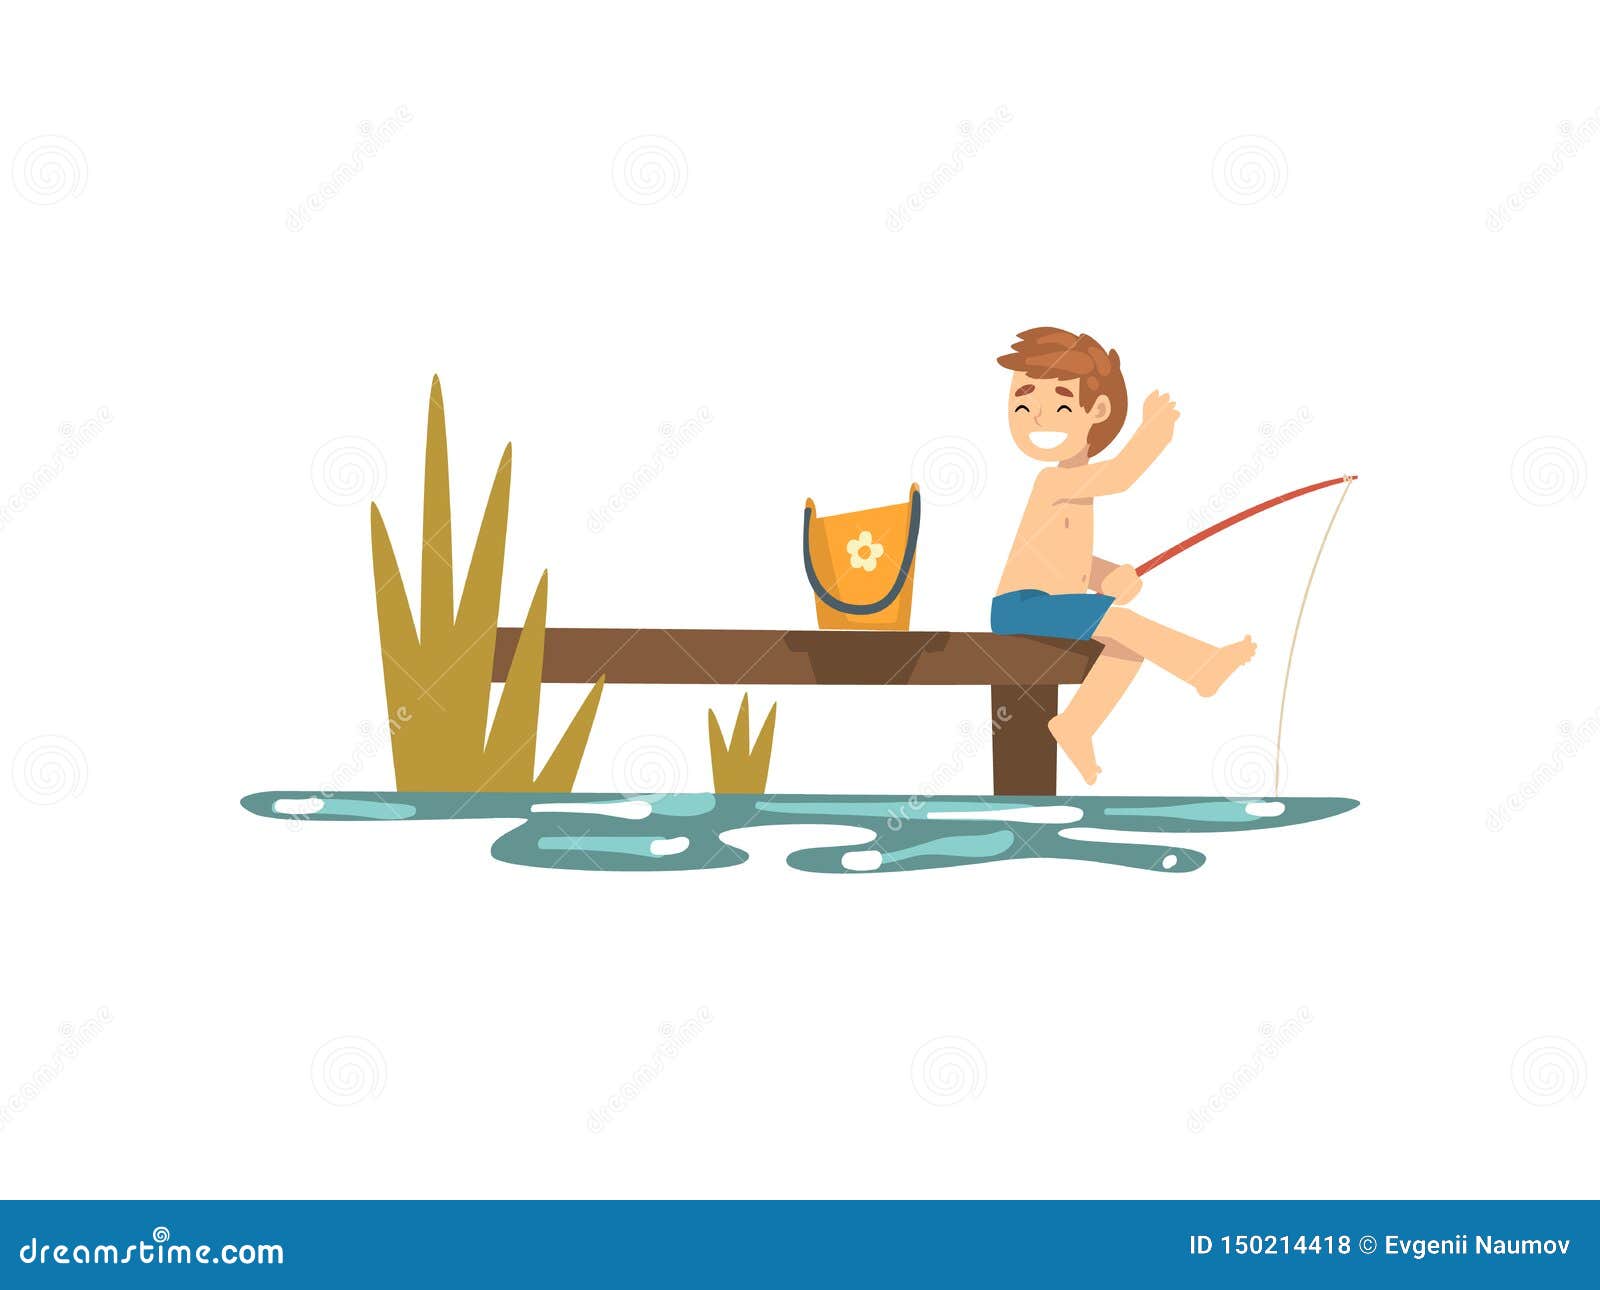 Download Cute Happy Boy Fishing From Pier Into Sea Or River Shore, Fisherman Cartoon Character With ...